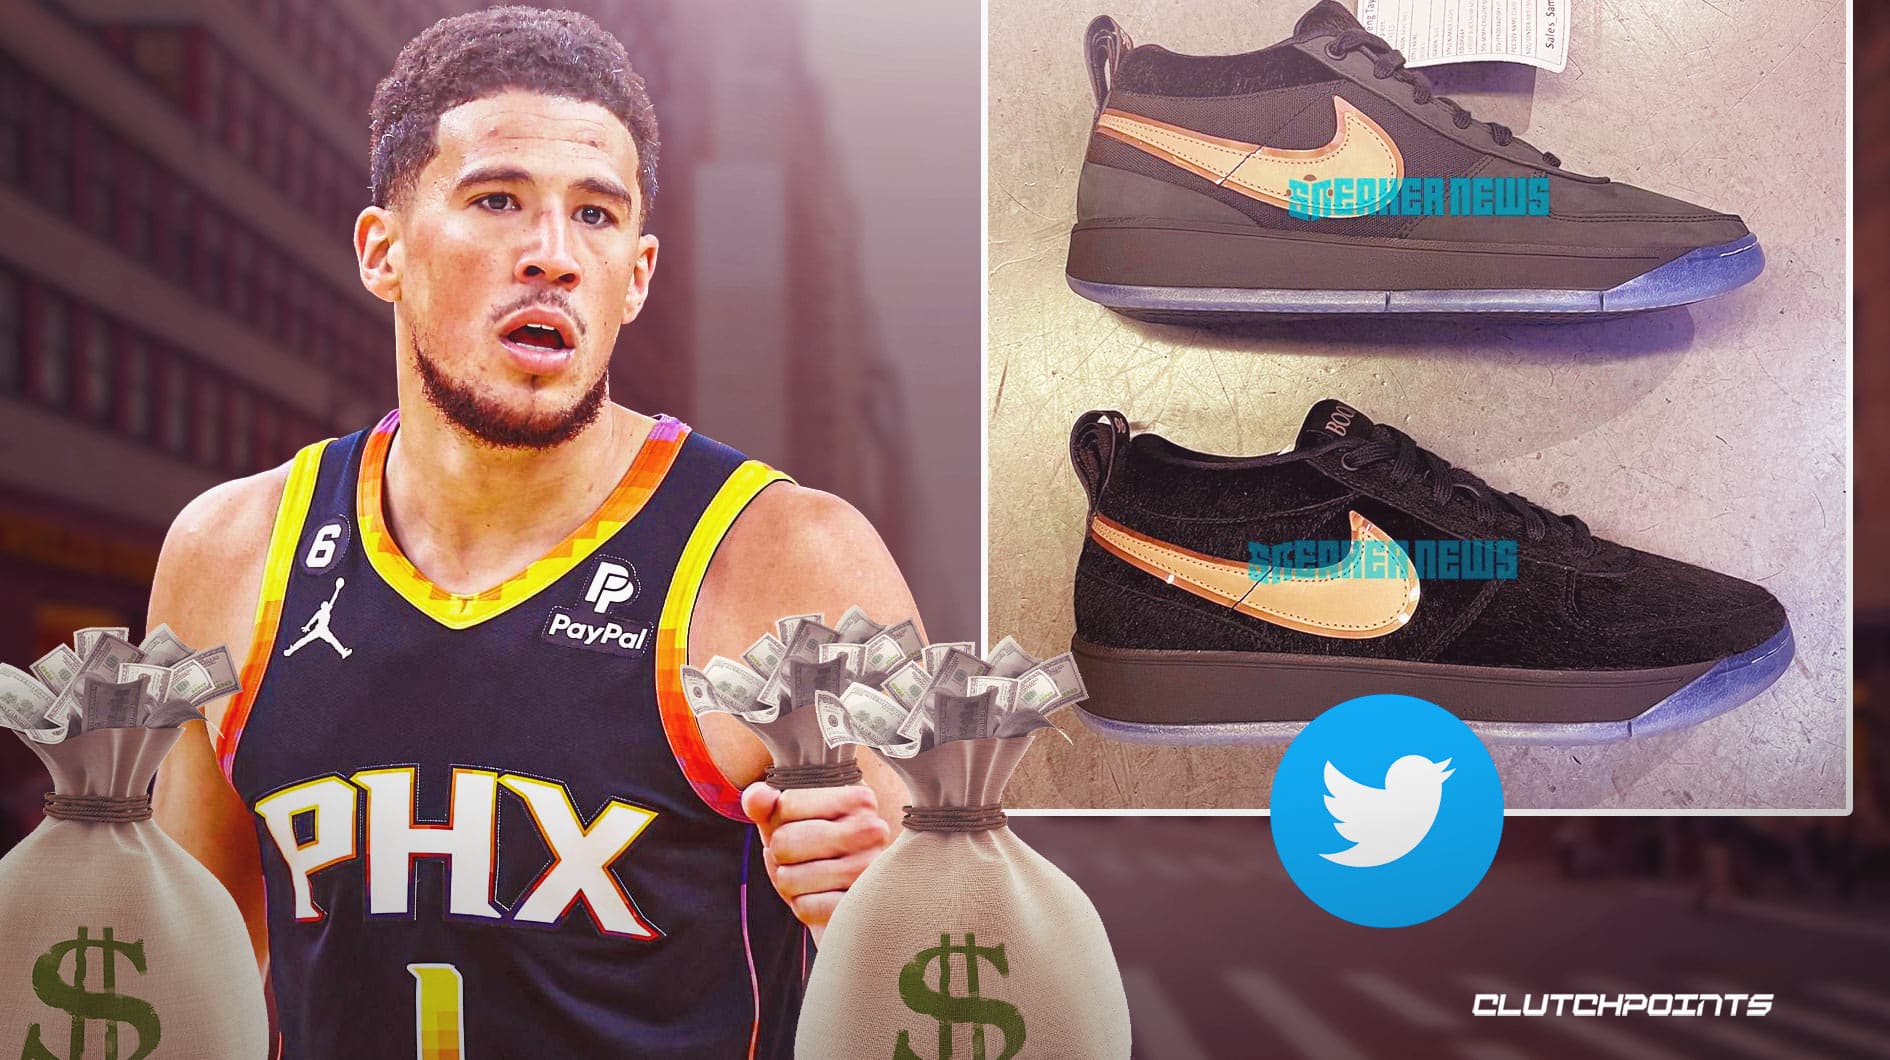 Official images of Devin Booker's signature shoes released - Burn